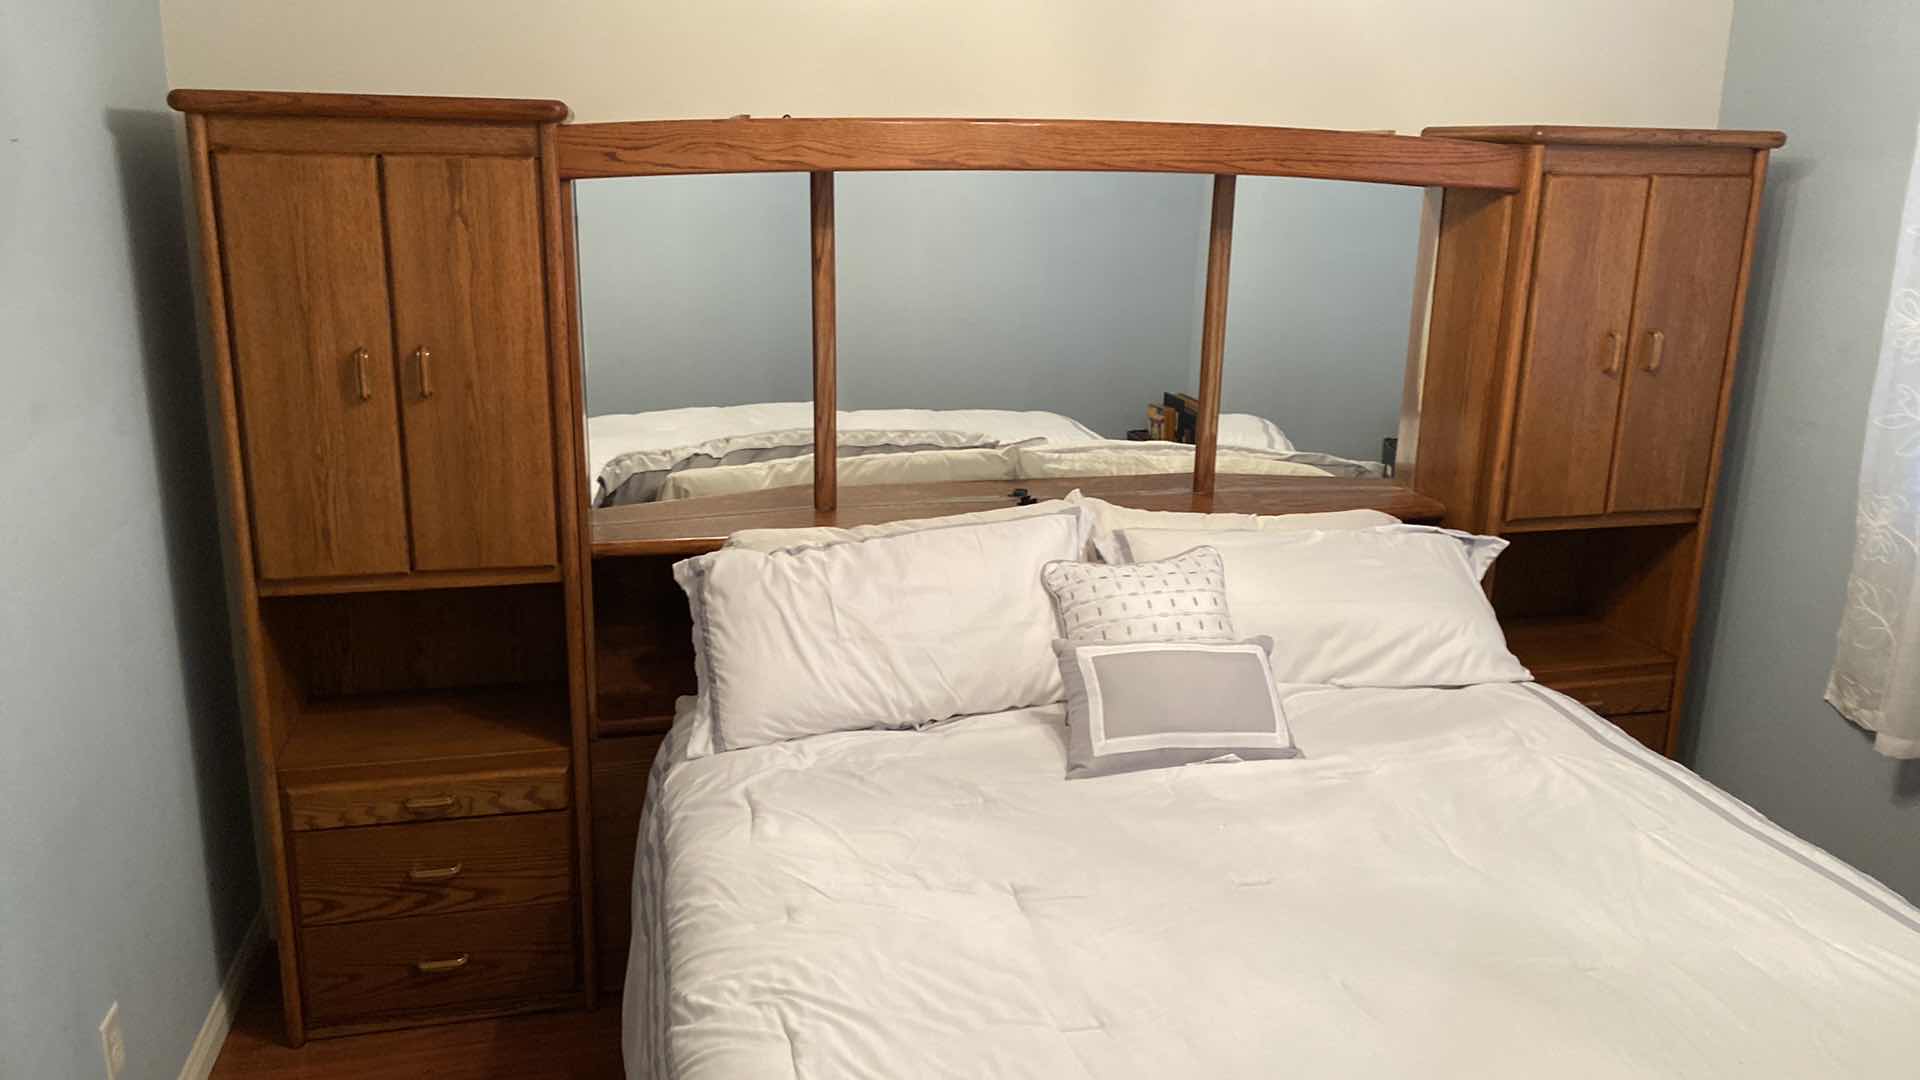 Photo 2 of CALIFORNIA/EASTERN KING OAK BEDFRAME WITH MIRRORED HEADBOARD AND NIGHT STANDS